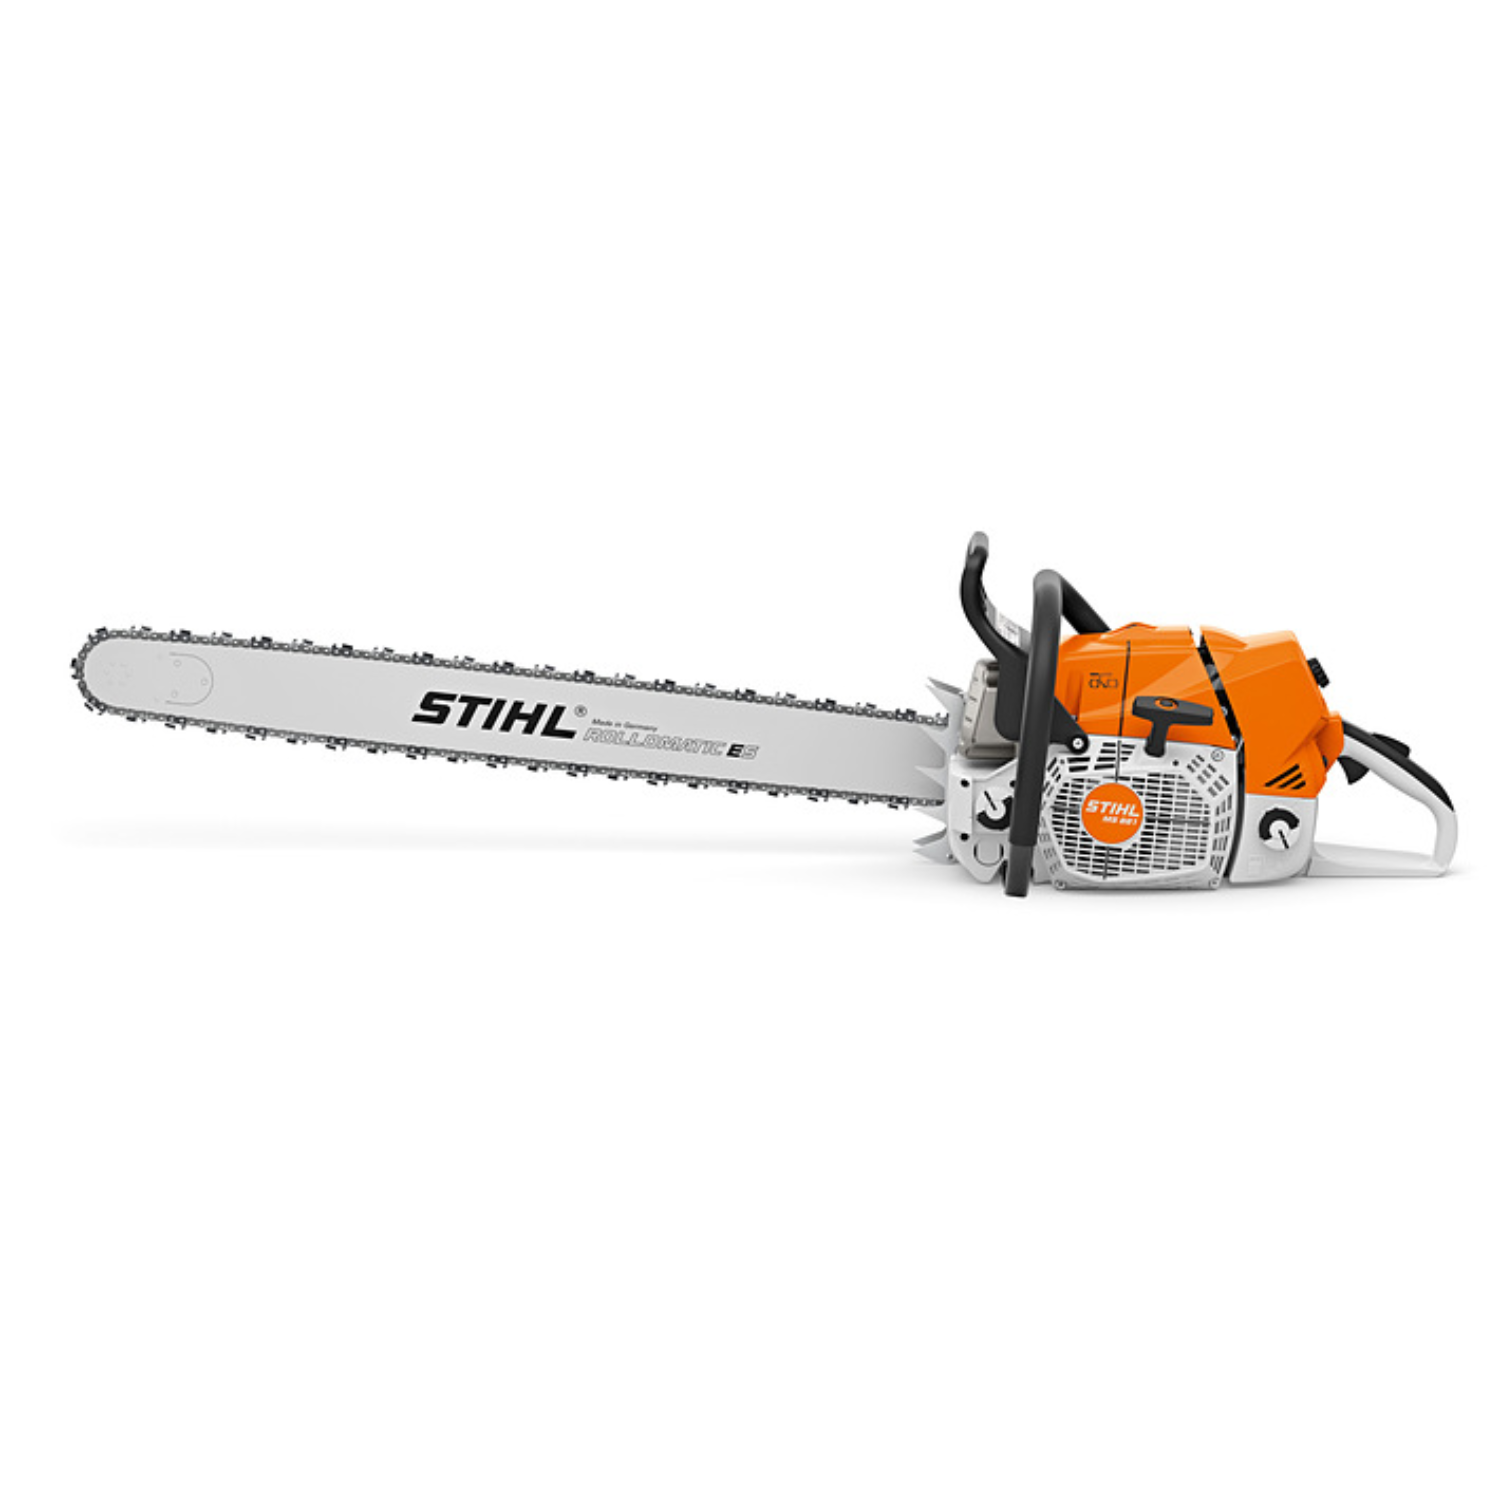 Stihl MS 881 MAGNUM Gas Powered Chainsaw with Quickstop